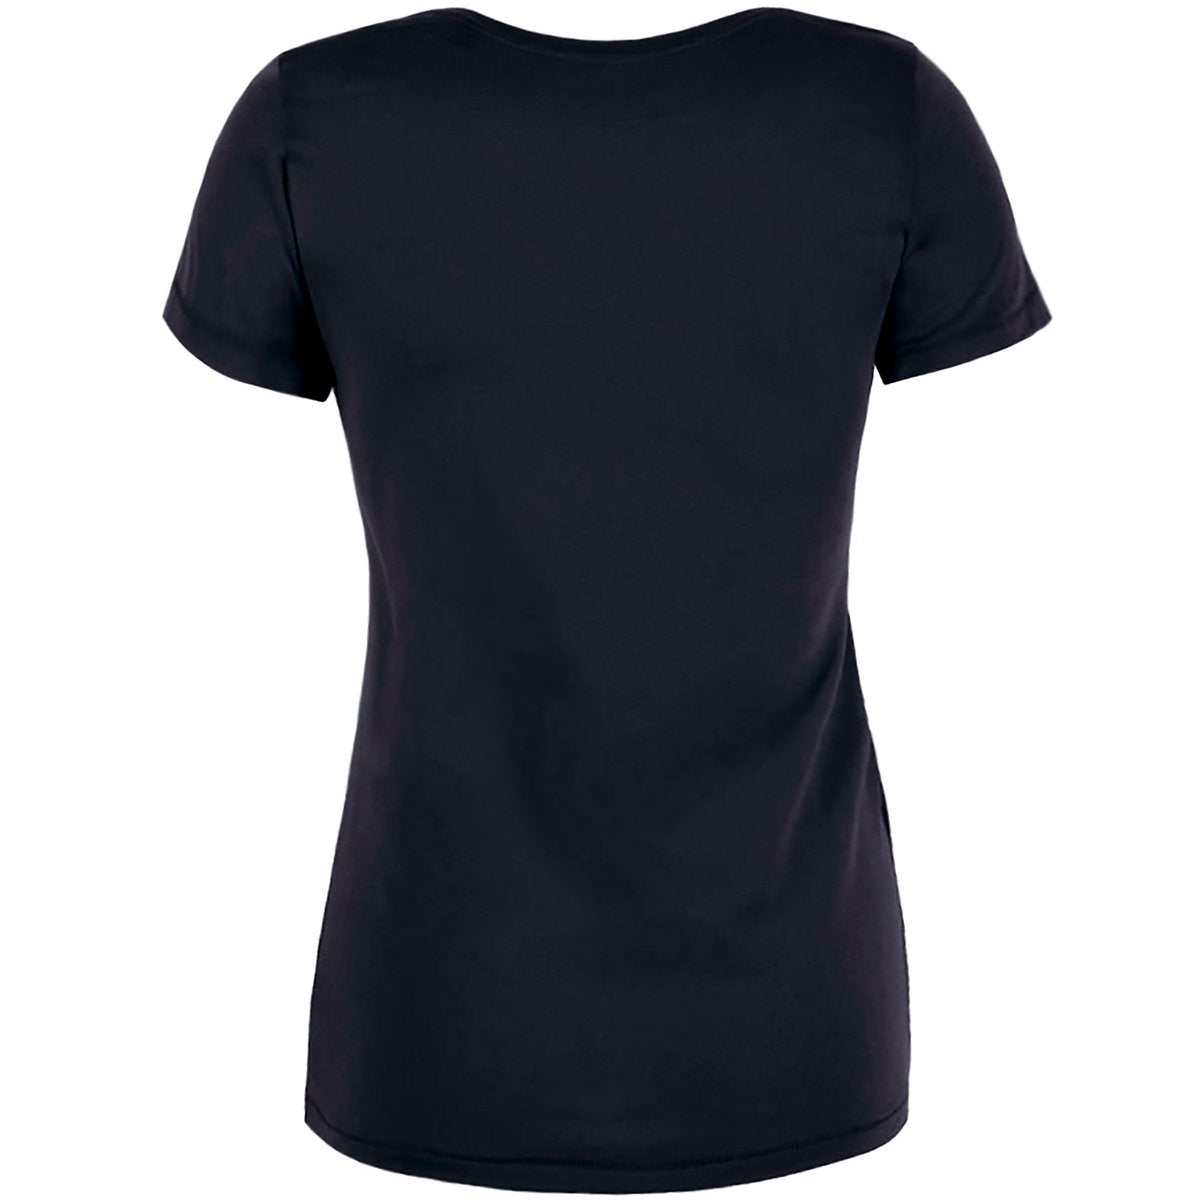 Audley Black Gold Abstract Print T-shirt Front View